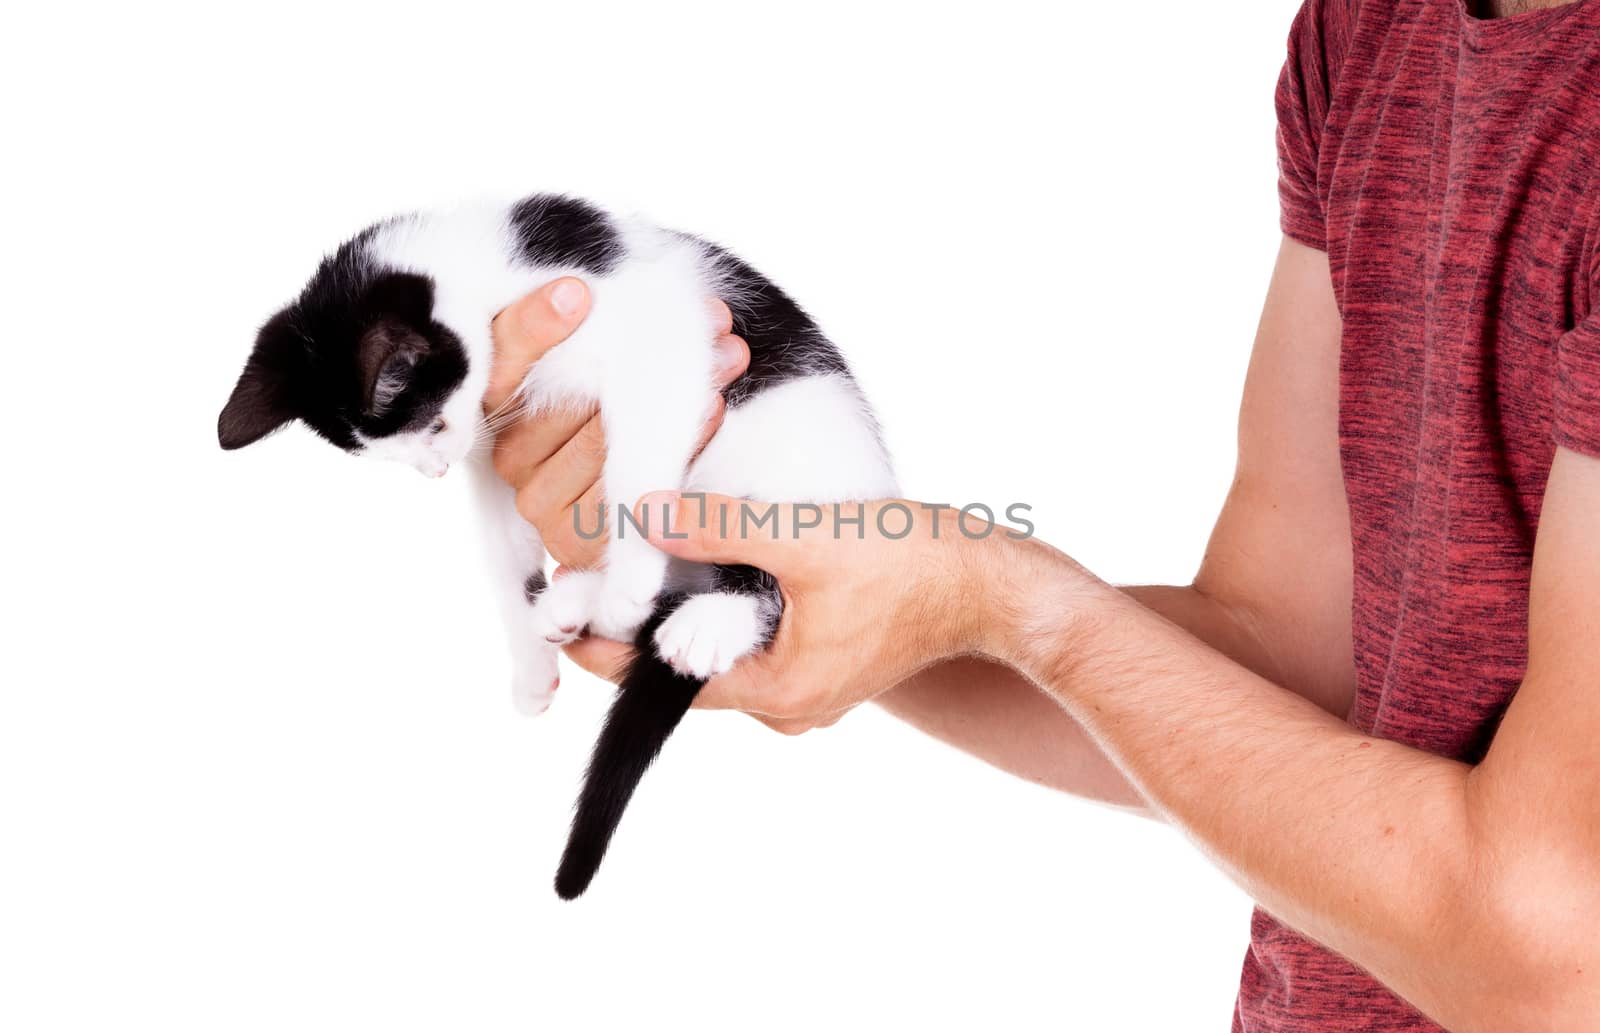 Black and white kitten in the hands of an adult man by michaklootwijk